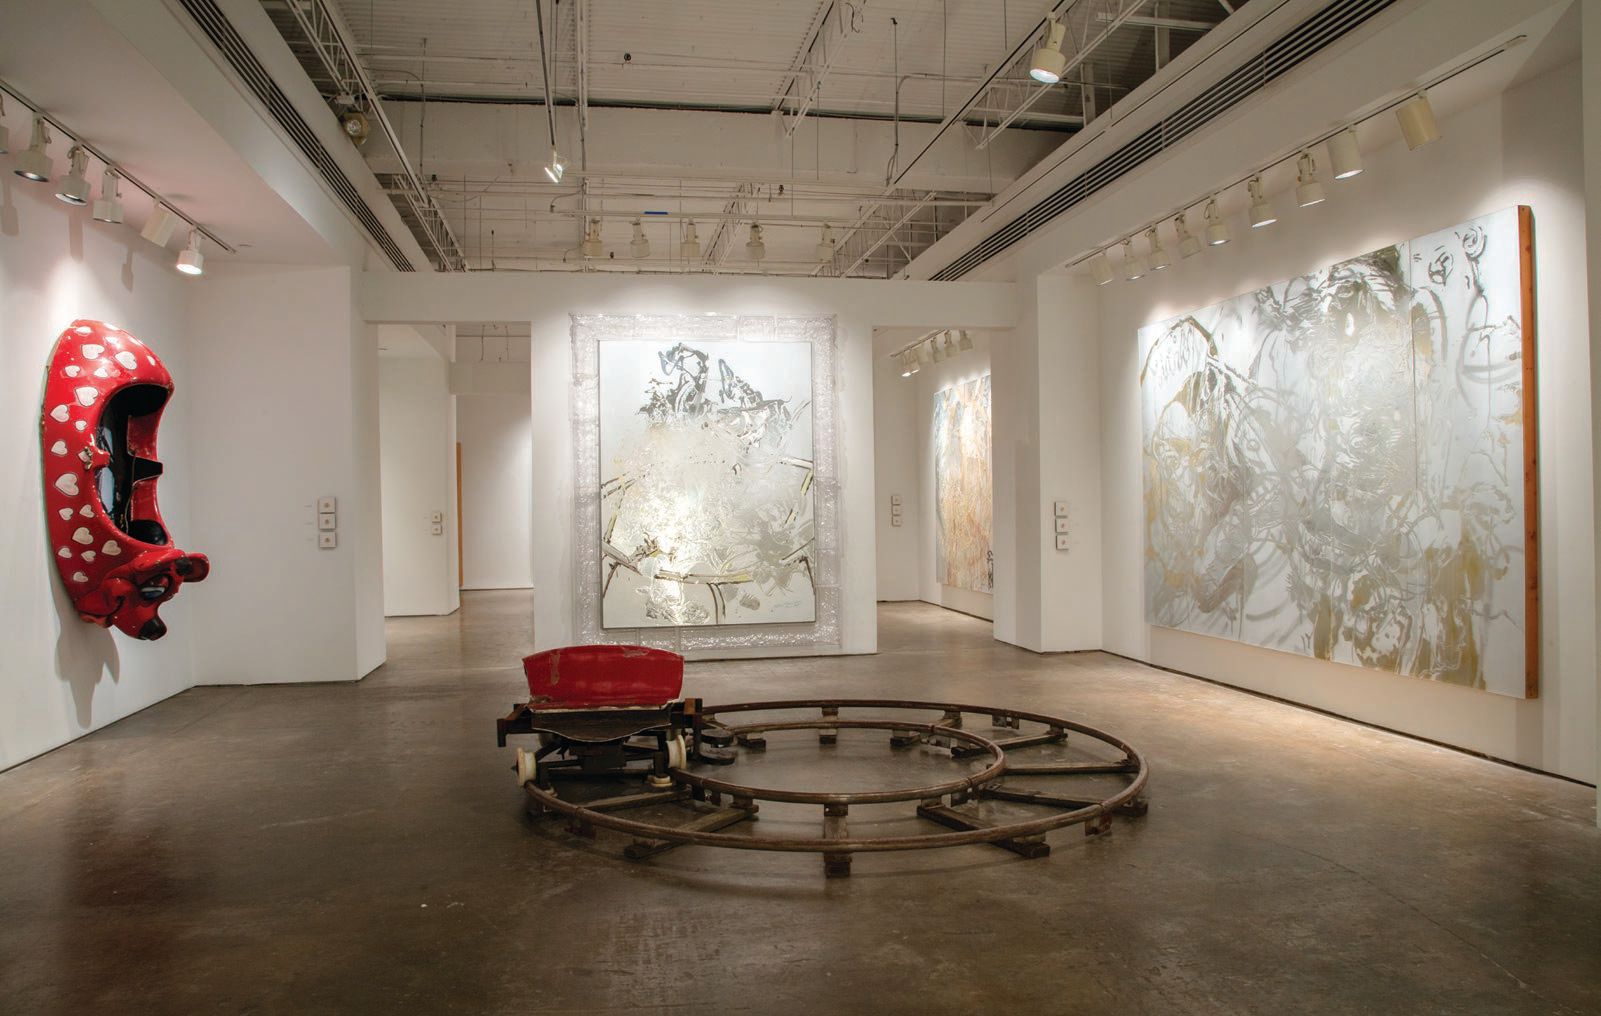 O’Neal’s exhibit About Now: An Introspective on display at Atlanta’s Bill Lowe Gallery. PHOTO BY: MIKE JENSEN